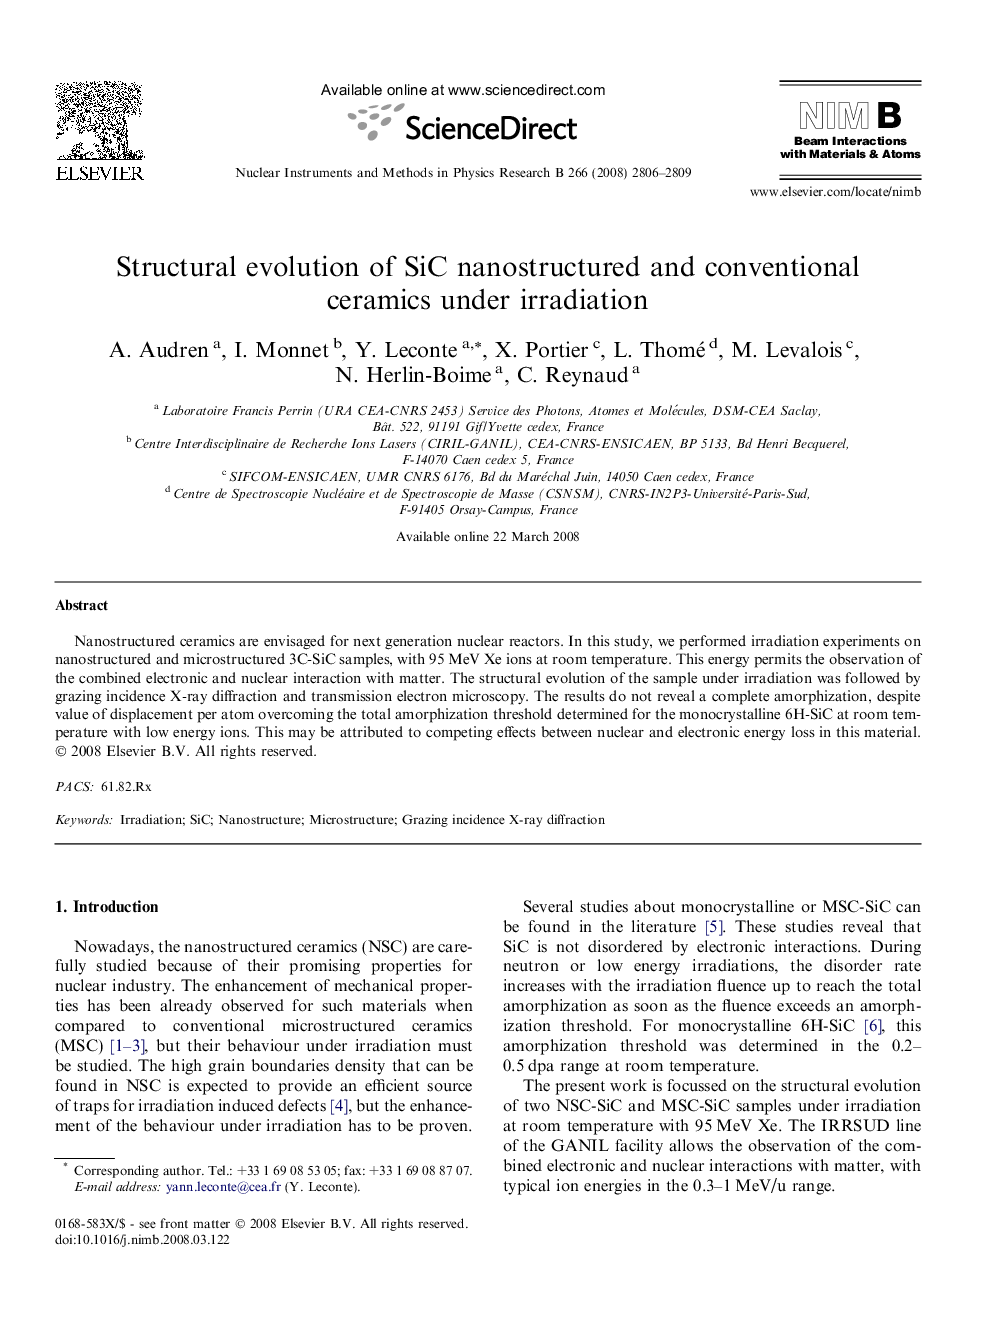 Structural evolution of SiC nanostructured and conventional ceramics under irradiation